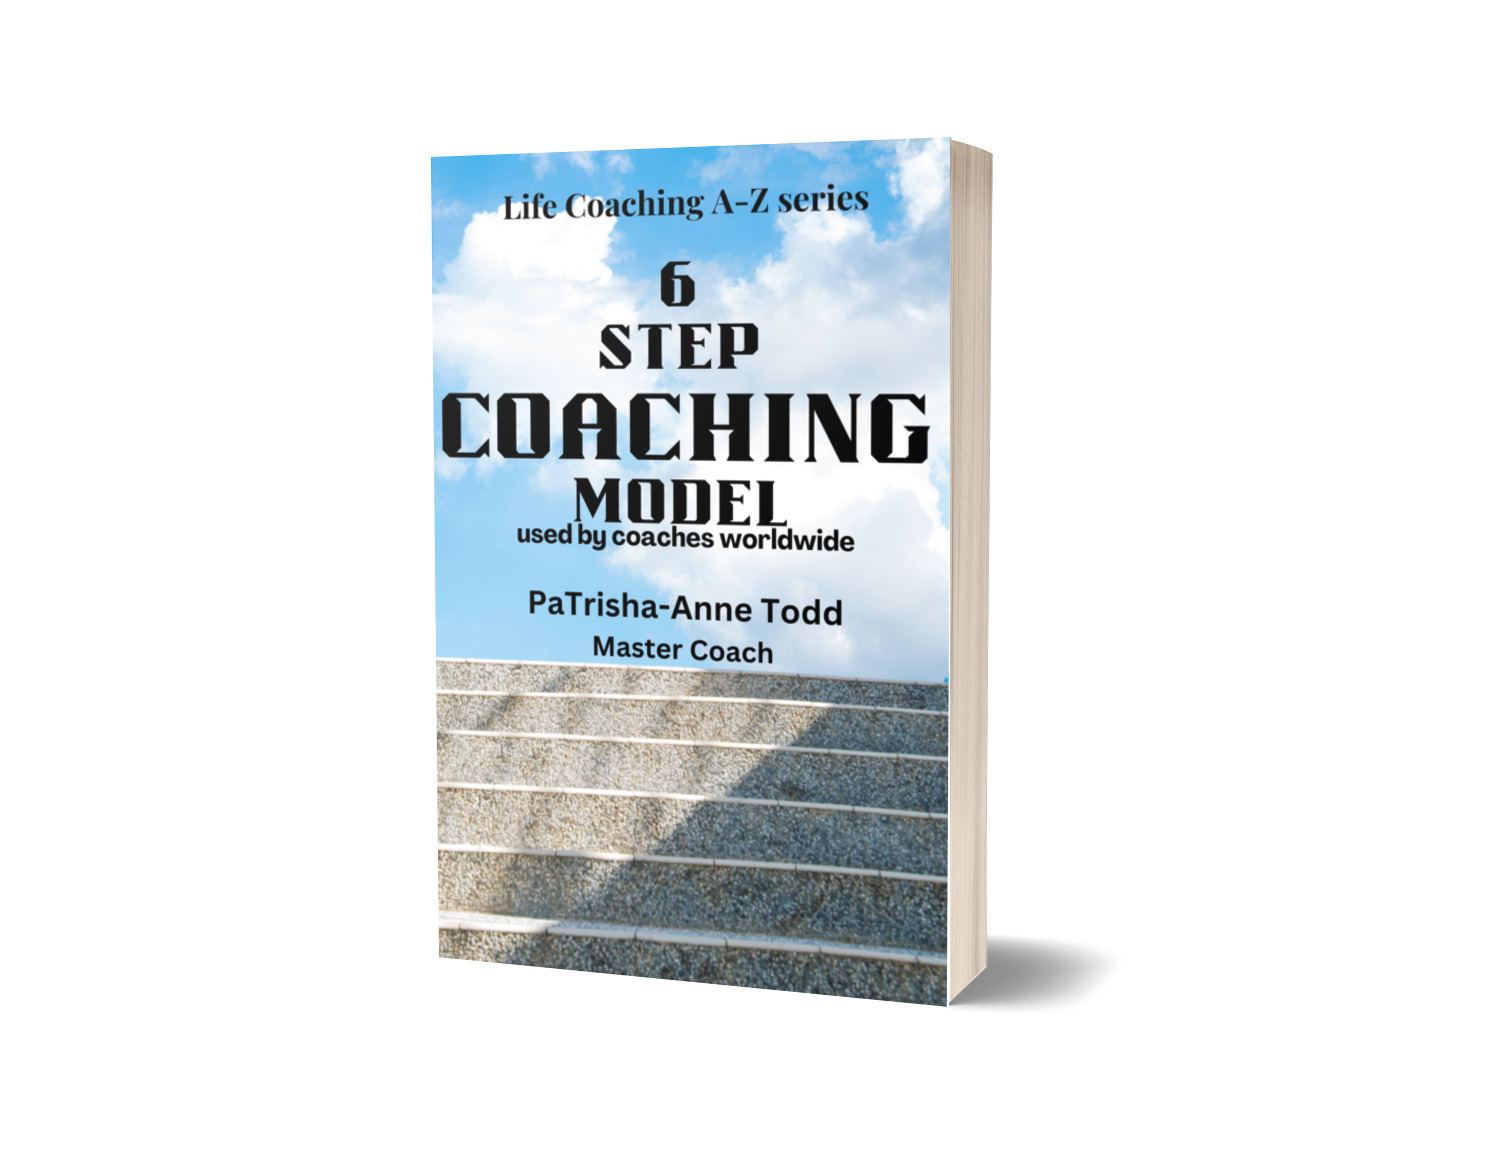 6 Step Coaching Model used by coaches worldwide